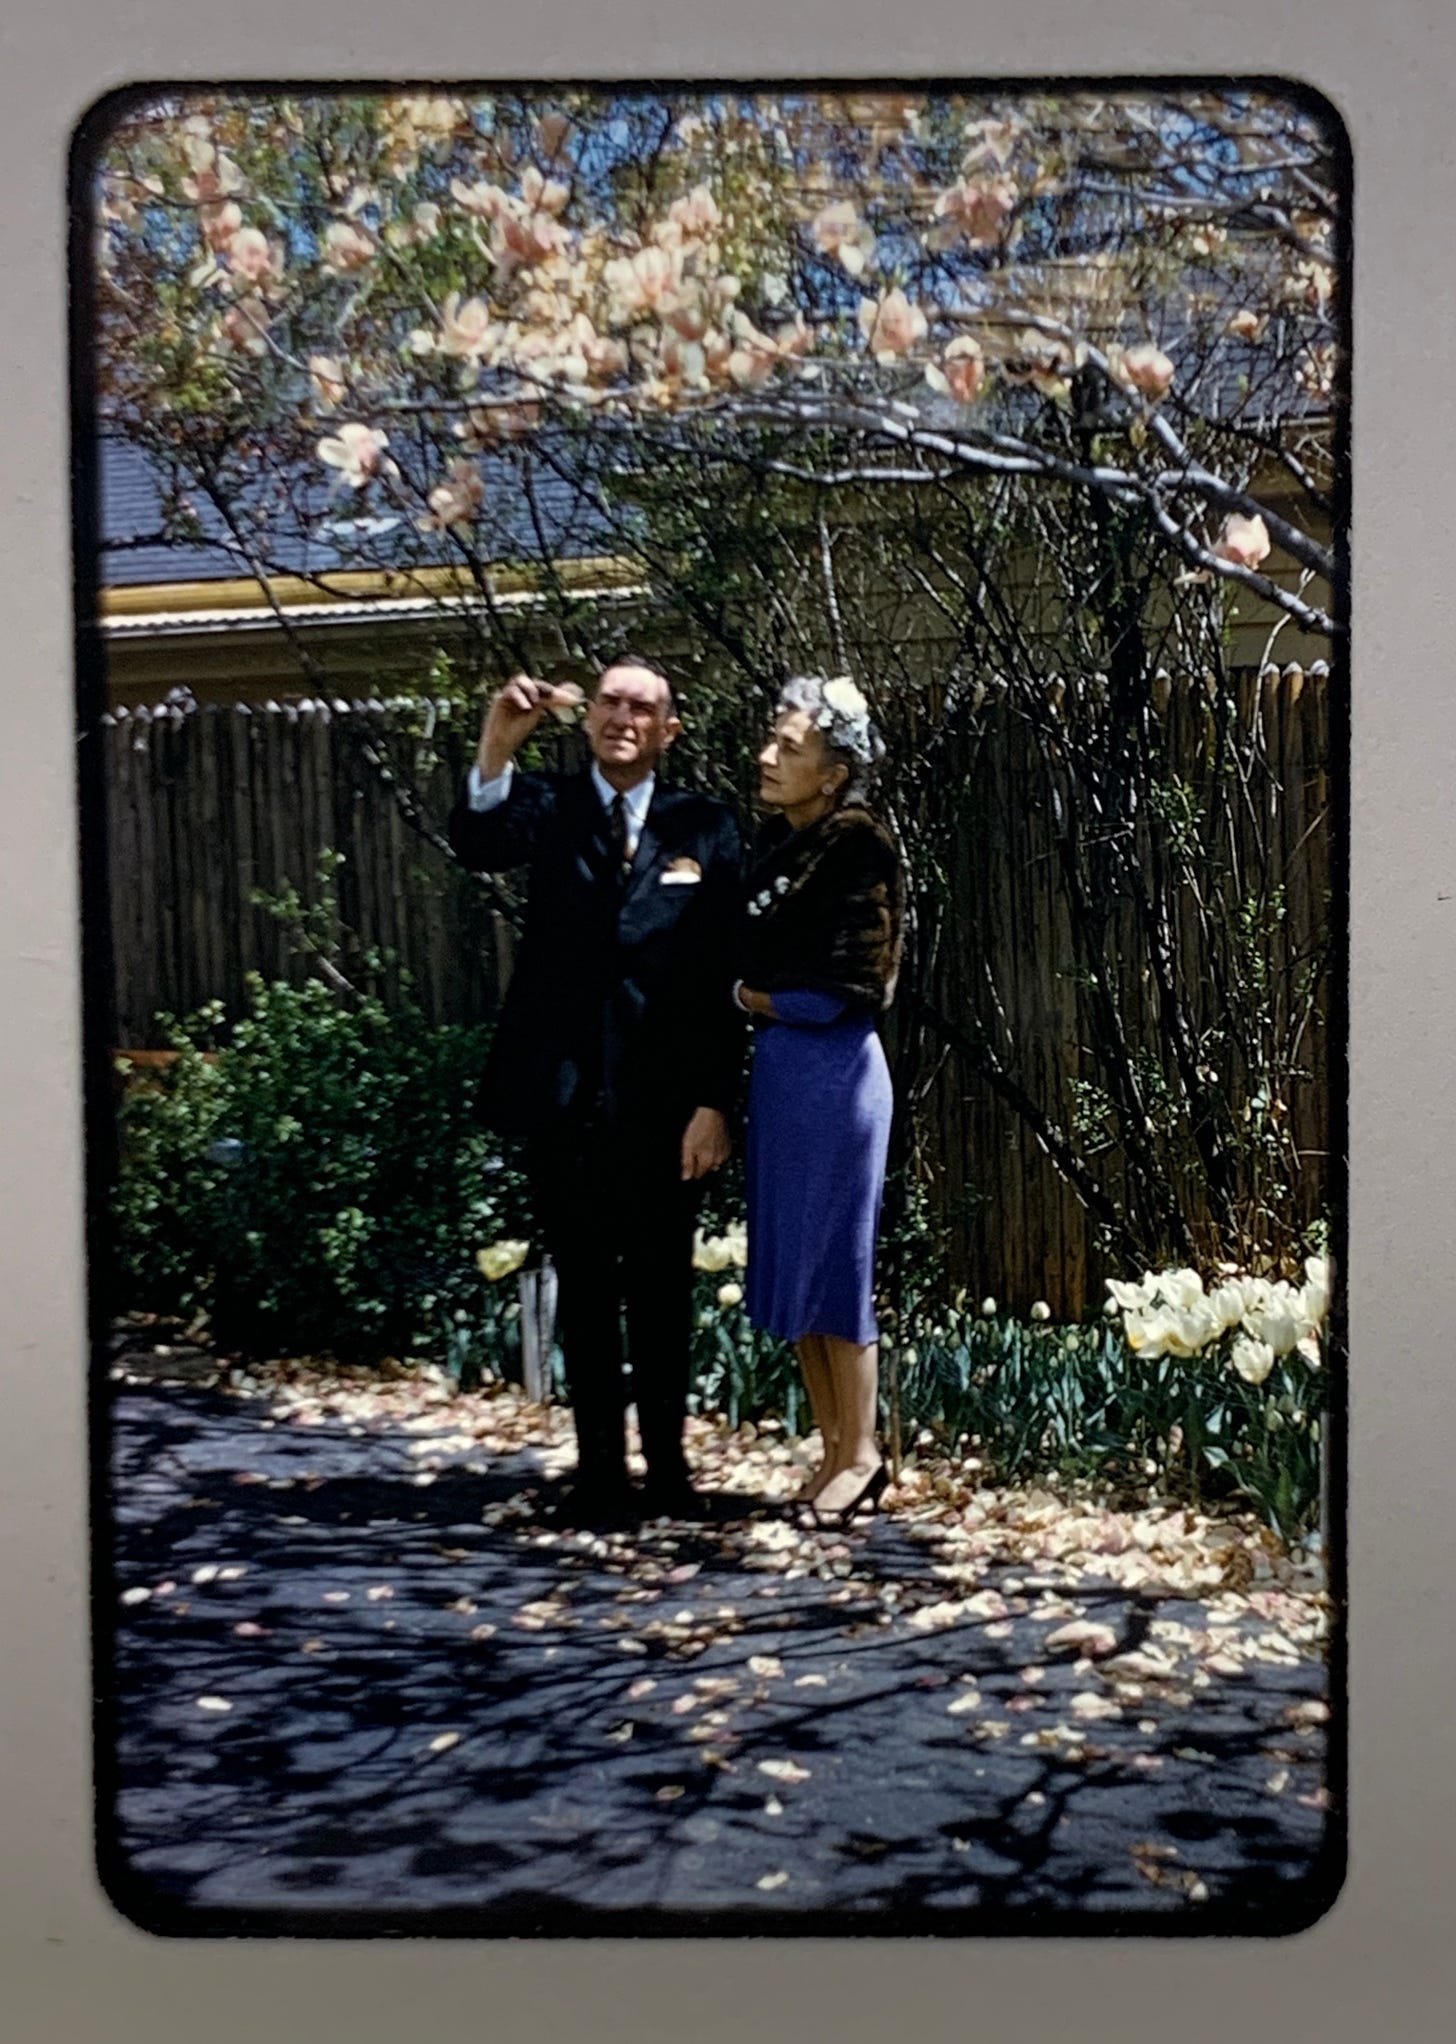 A man in a suit and woman in a blue dress and fur stole stand on a paved driveway beneath a pink flowered Magnolia tree.